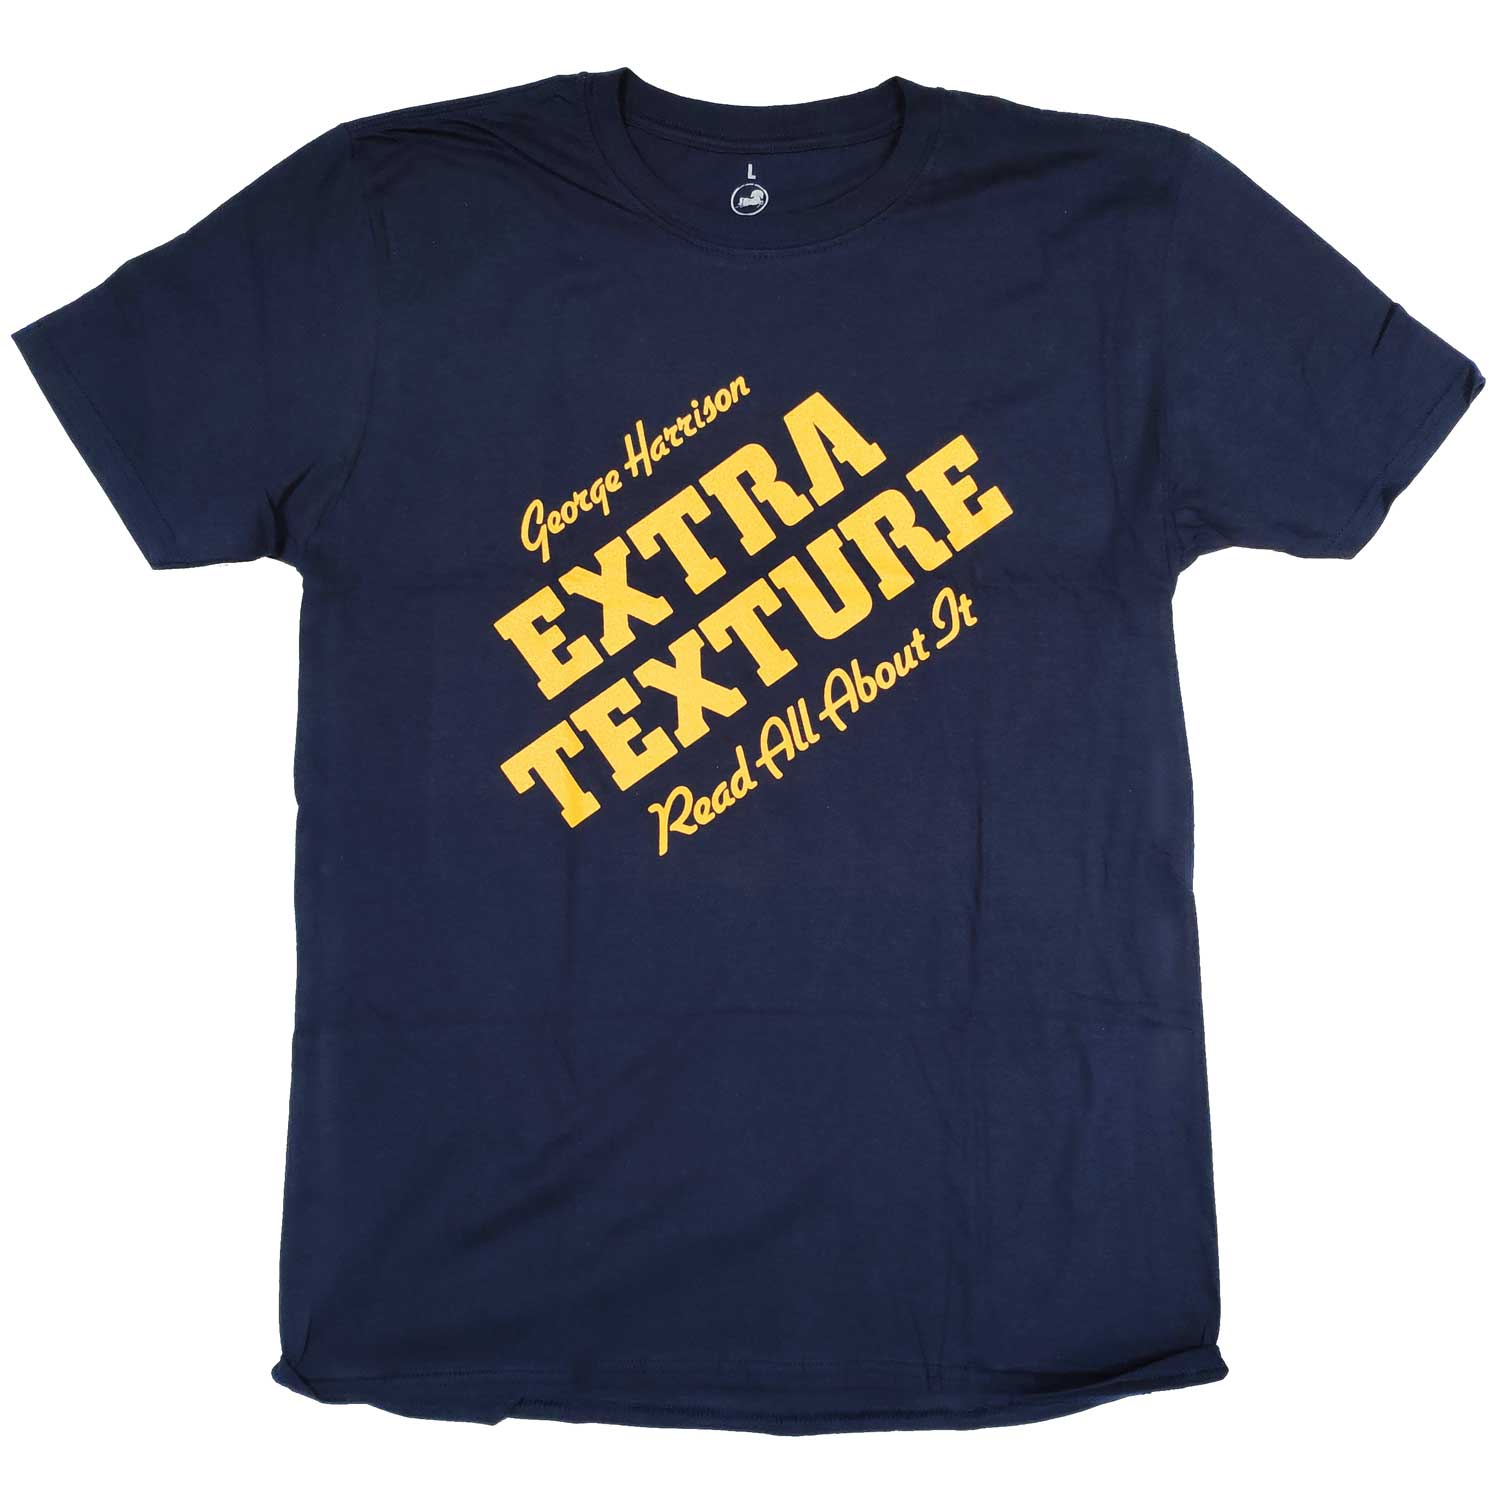 George Harrison T Shirt - Extra Texture 100% Official